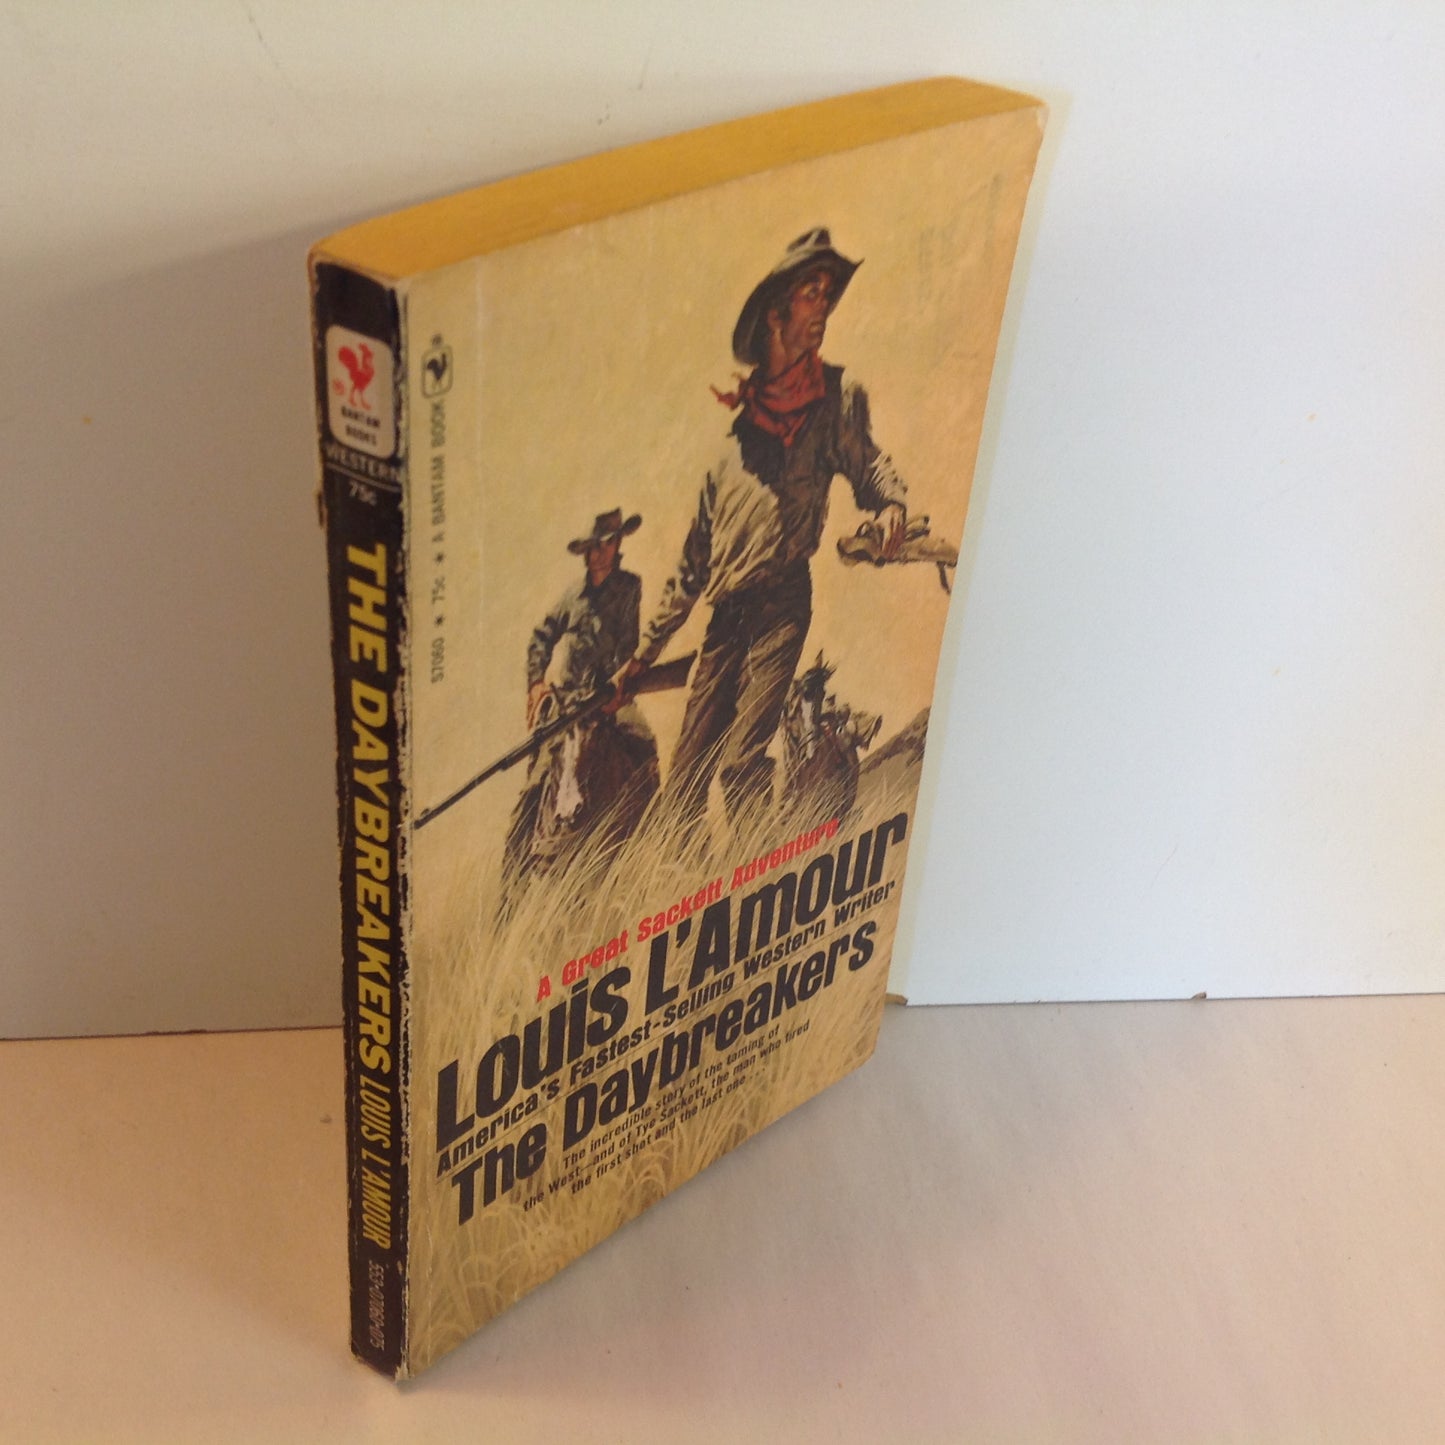 Vintage 1971 Mass Market Paperback The Daybreakers Louis L'Amour